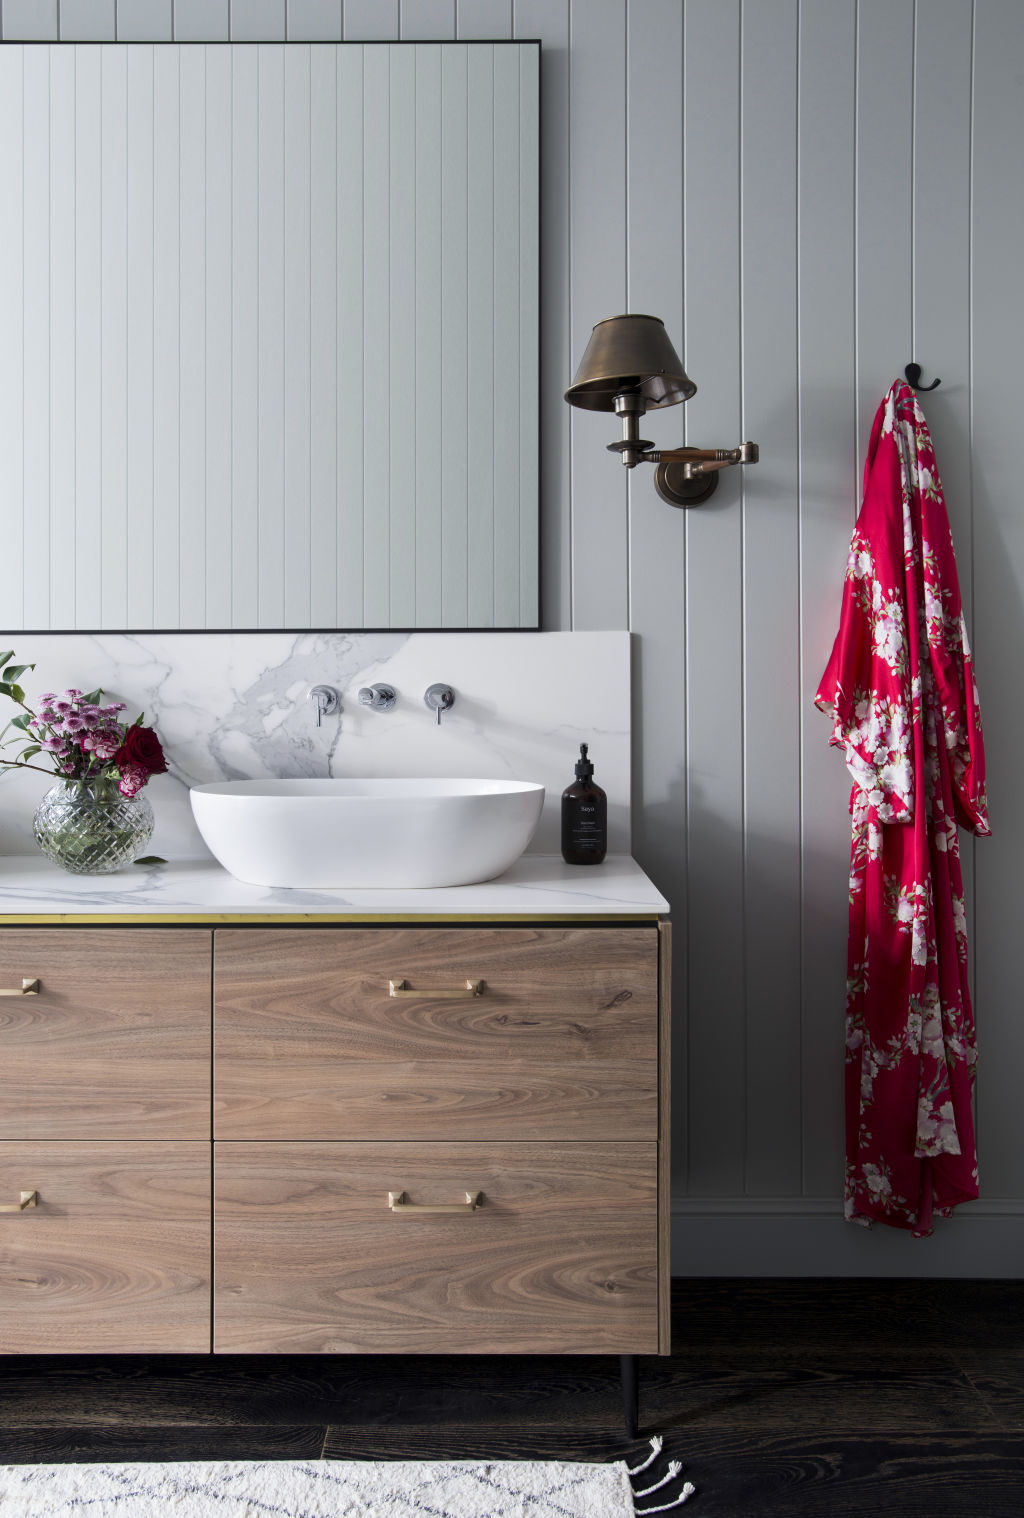 Using a flat profile for bathroom cabinetry can save you money. Photo: Mindi Cooke